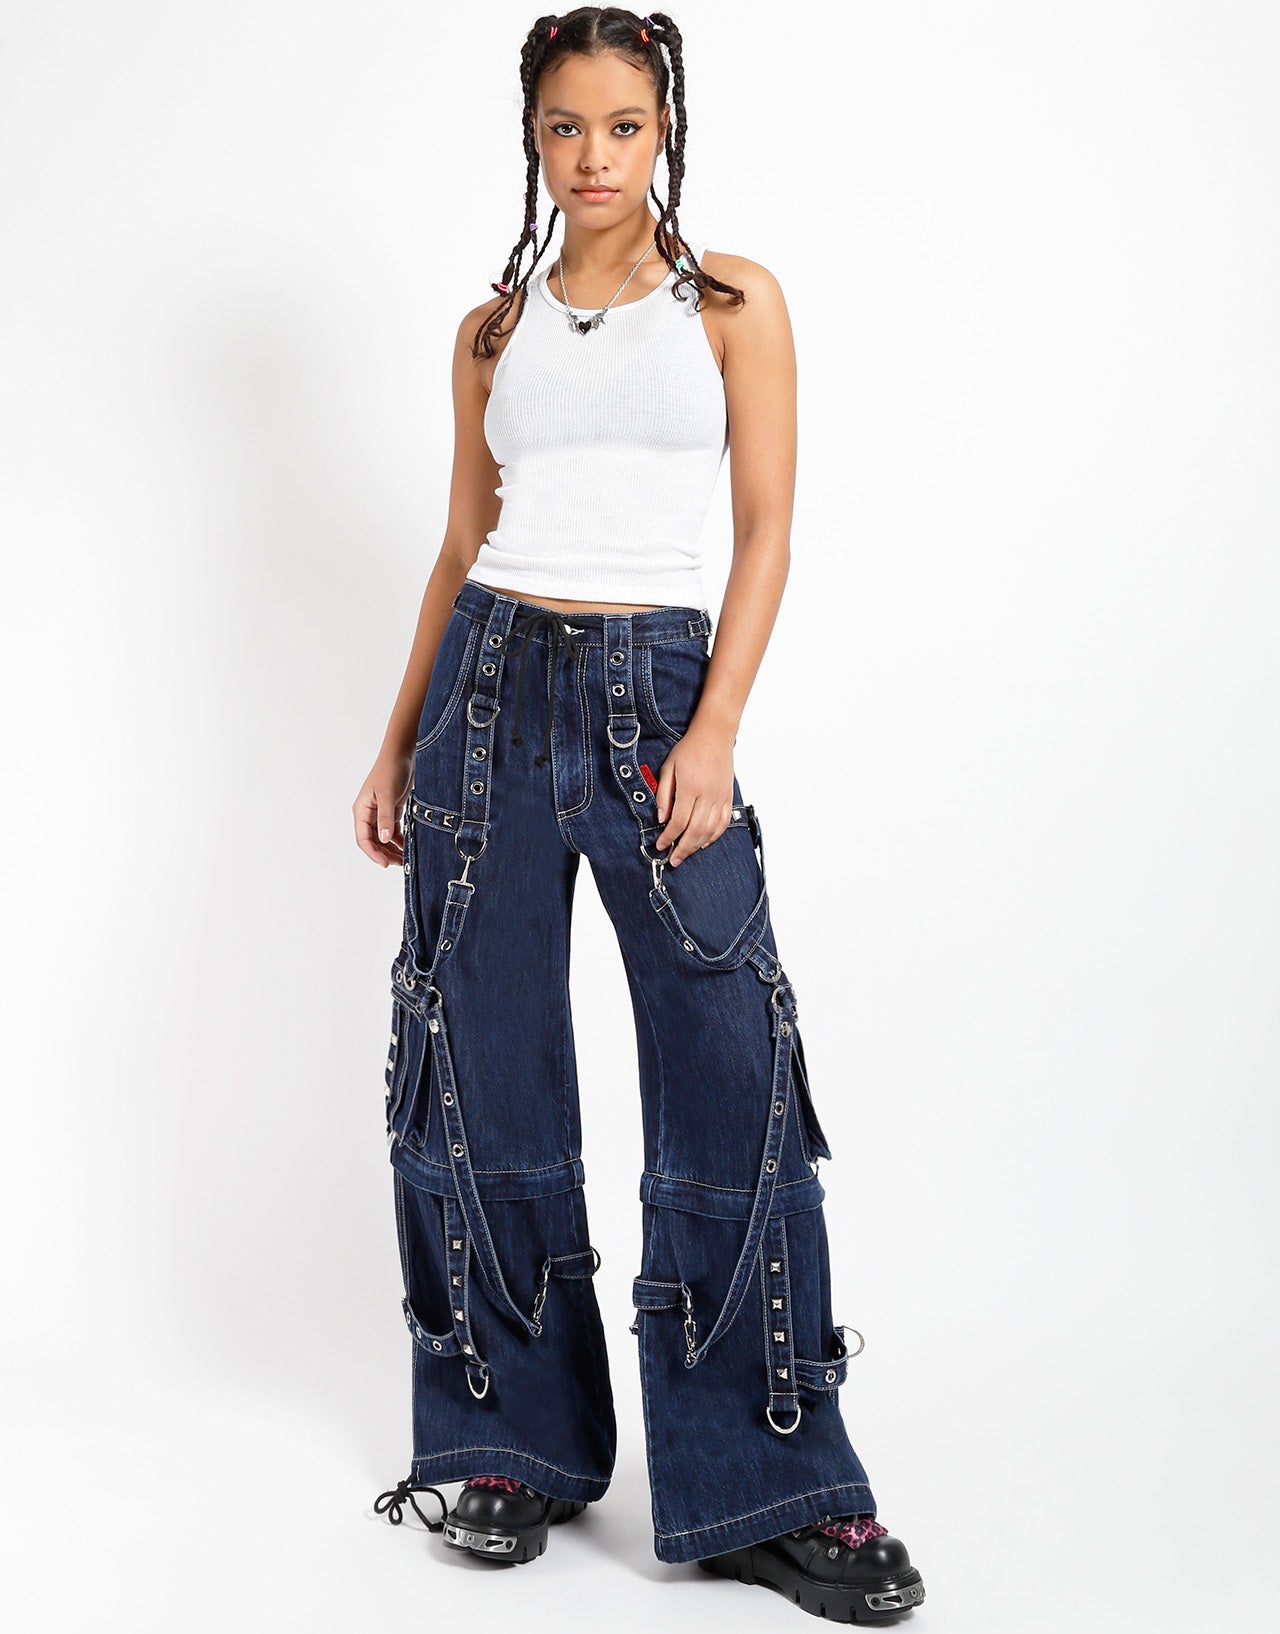 CRAZY PIPER PANT WHITE